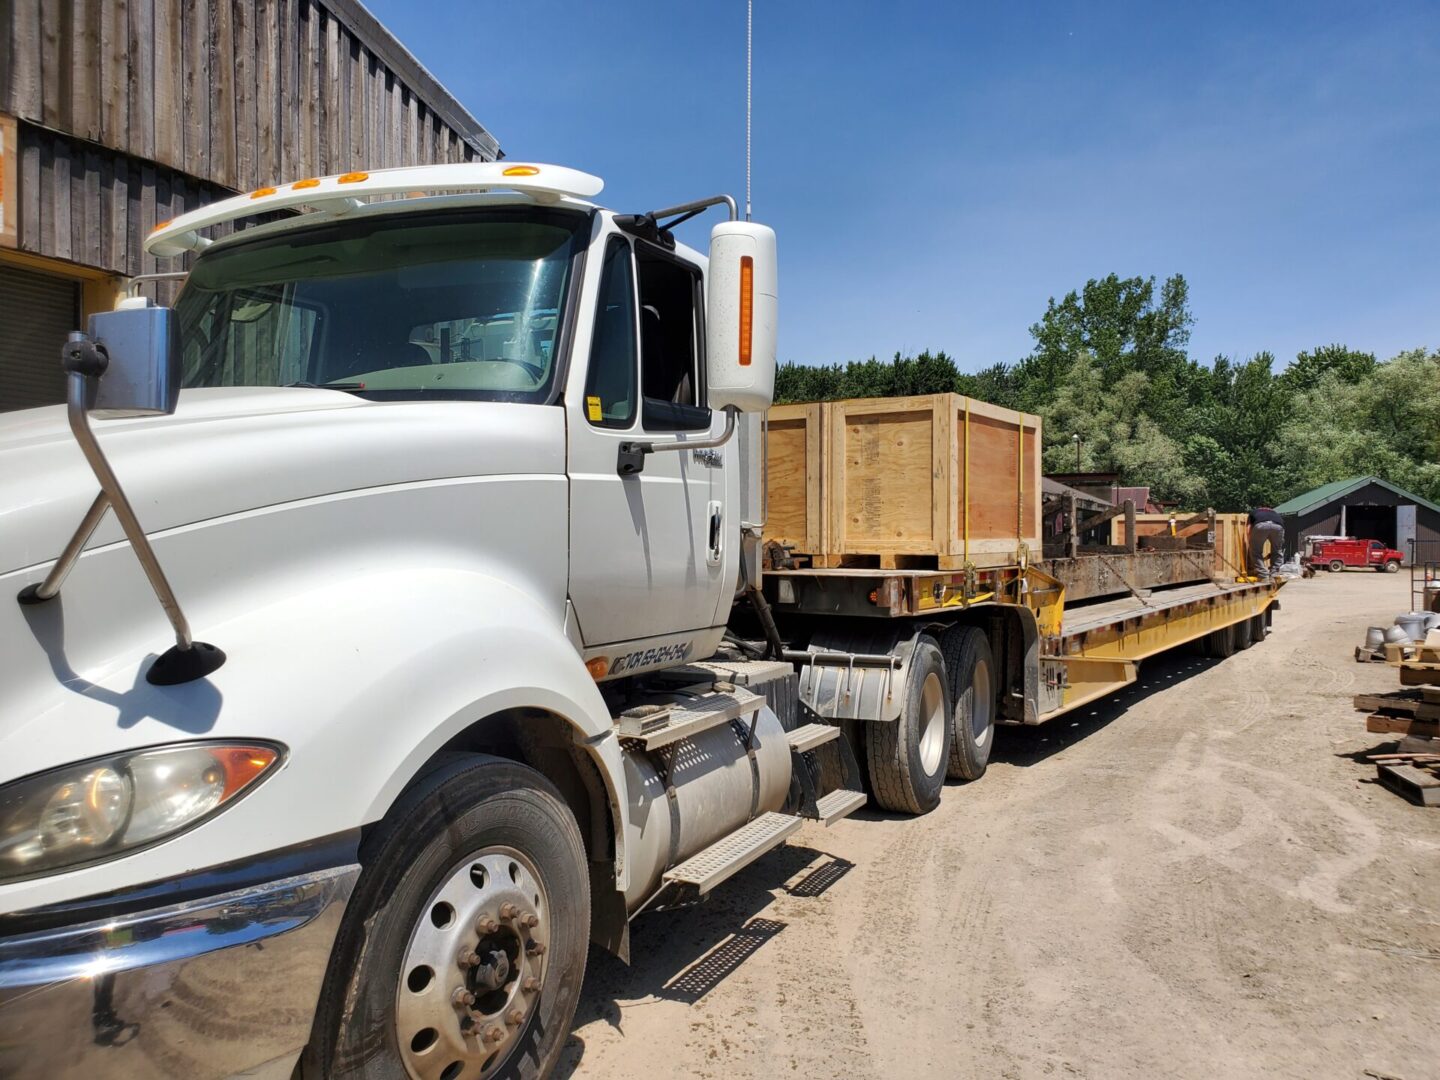 A flatbed truck with a crate